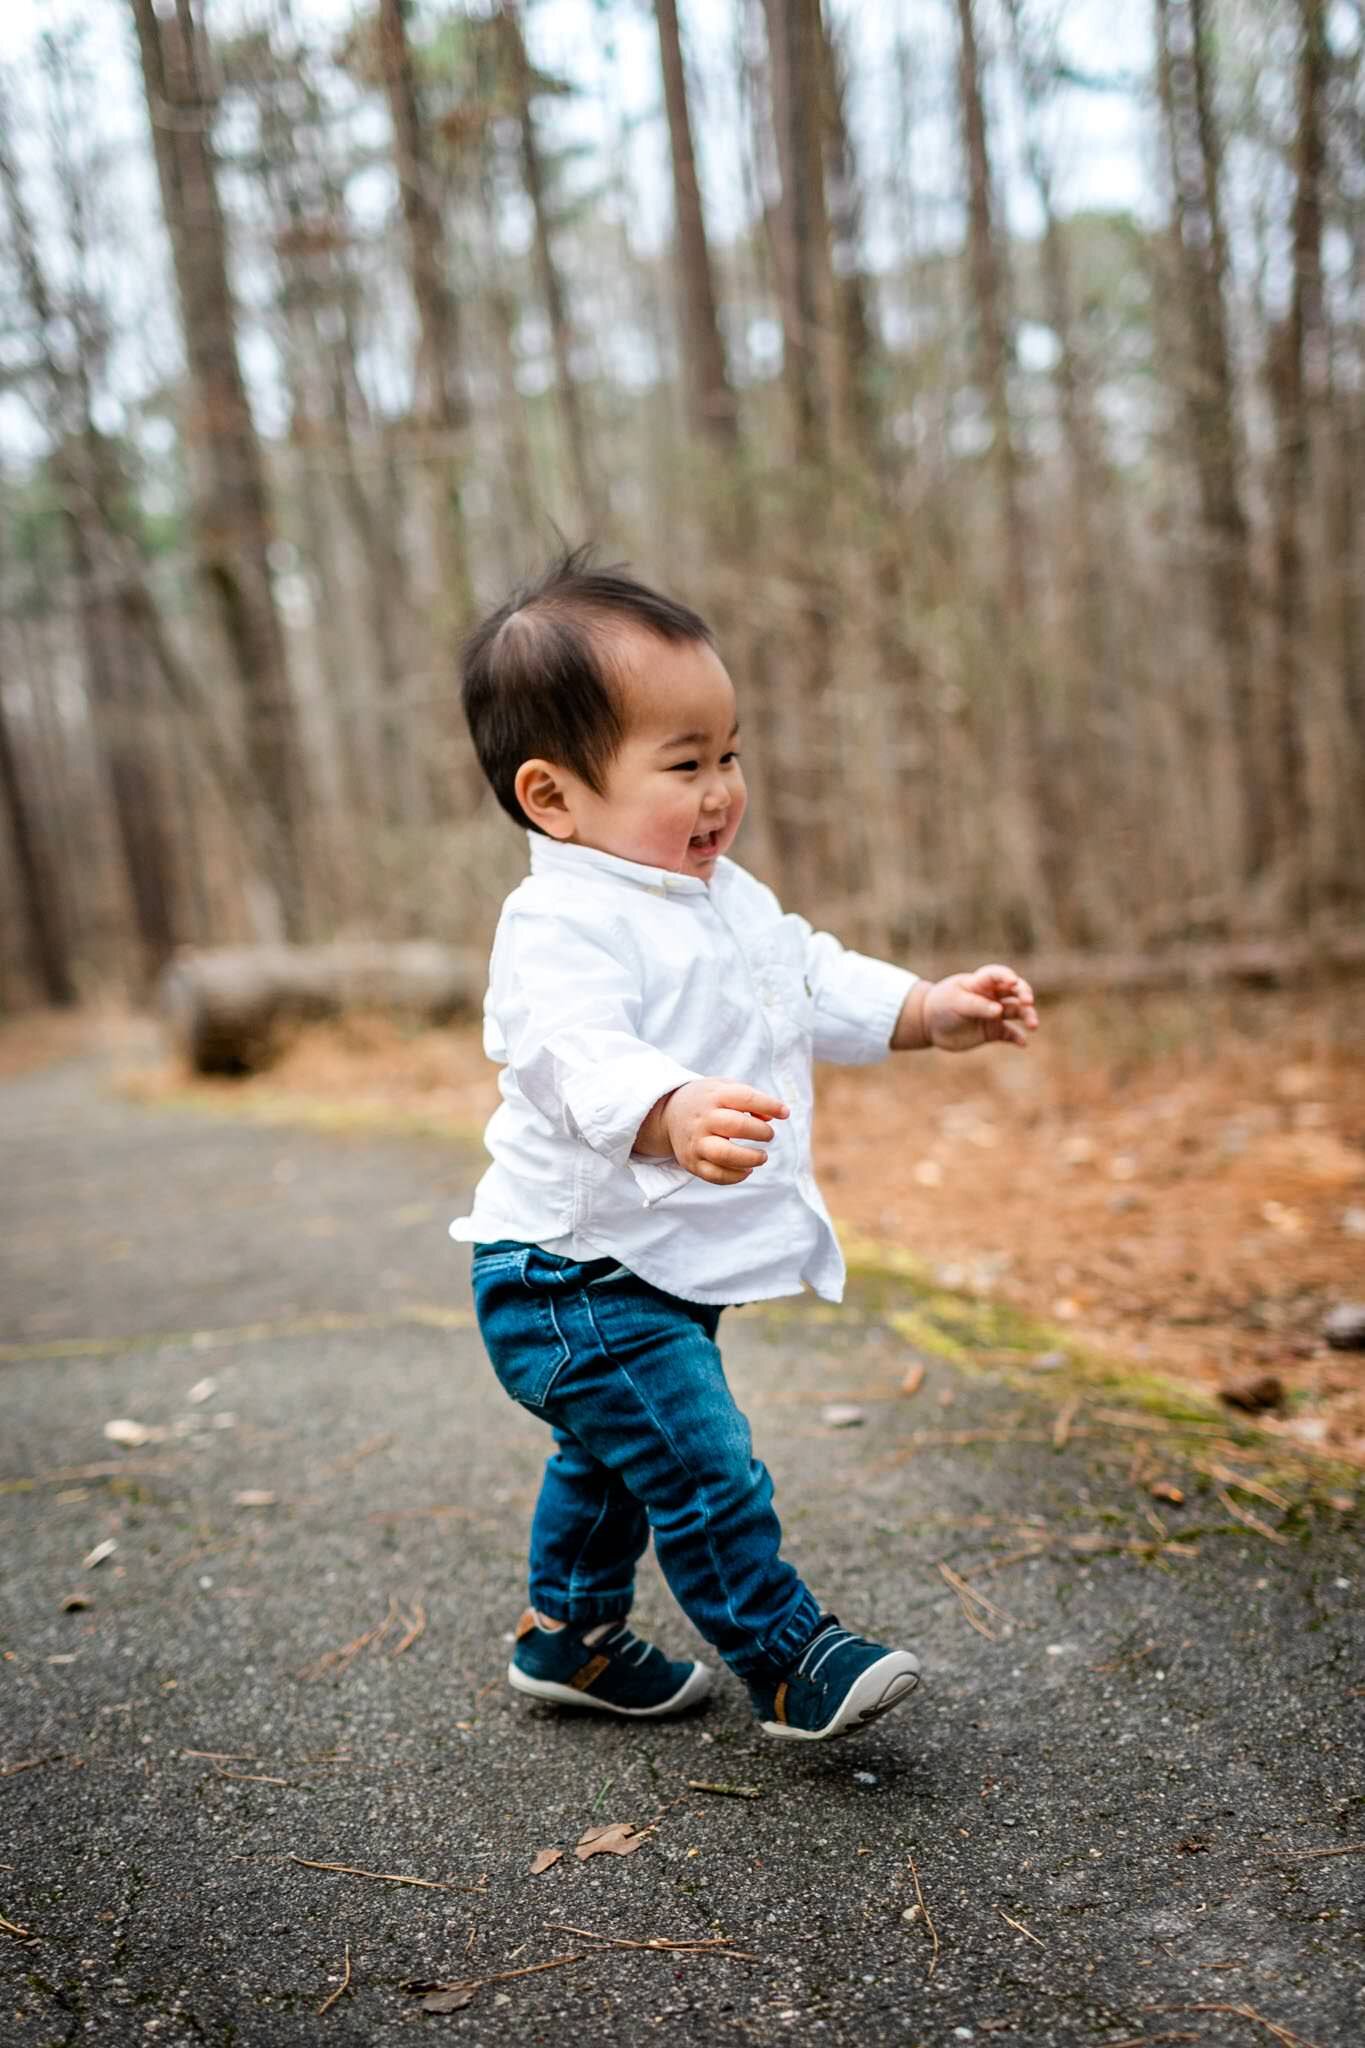 Raleigh Family Photographer | By G. Lin Photography | Umstead Park | Baby walking